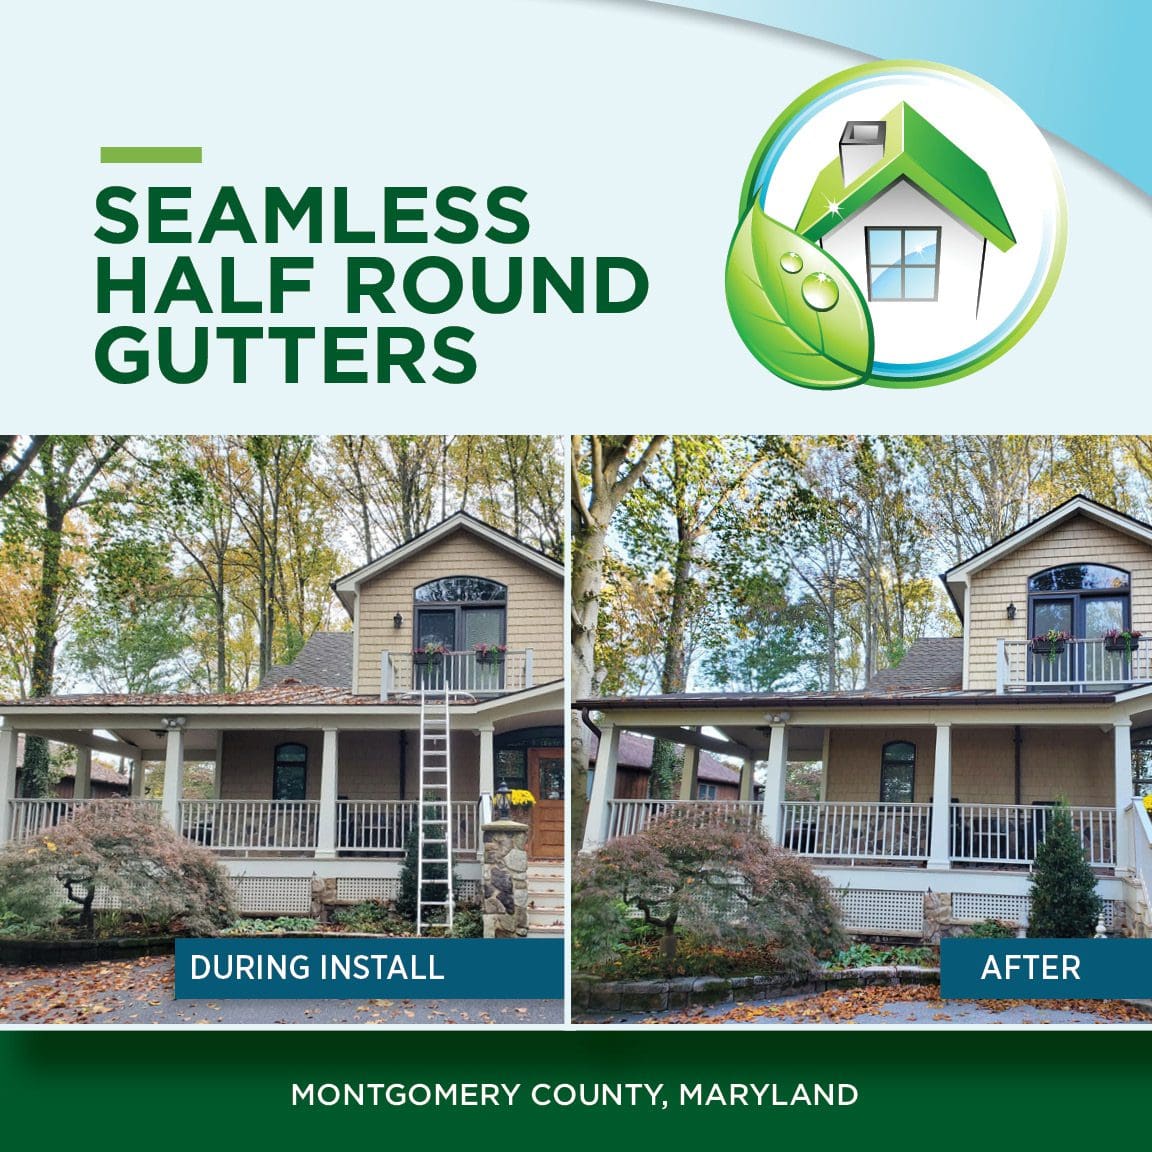 Seamless hald round gutters in Montgomery county Maryland